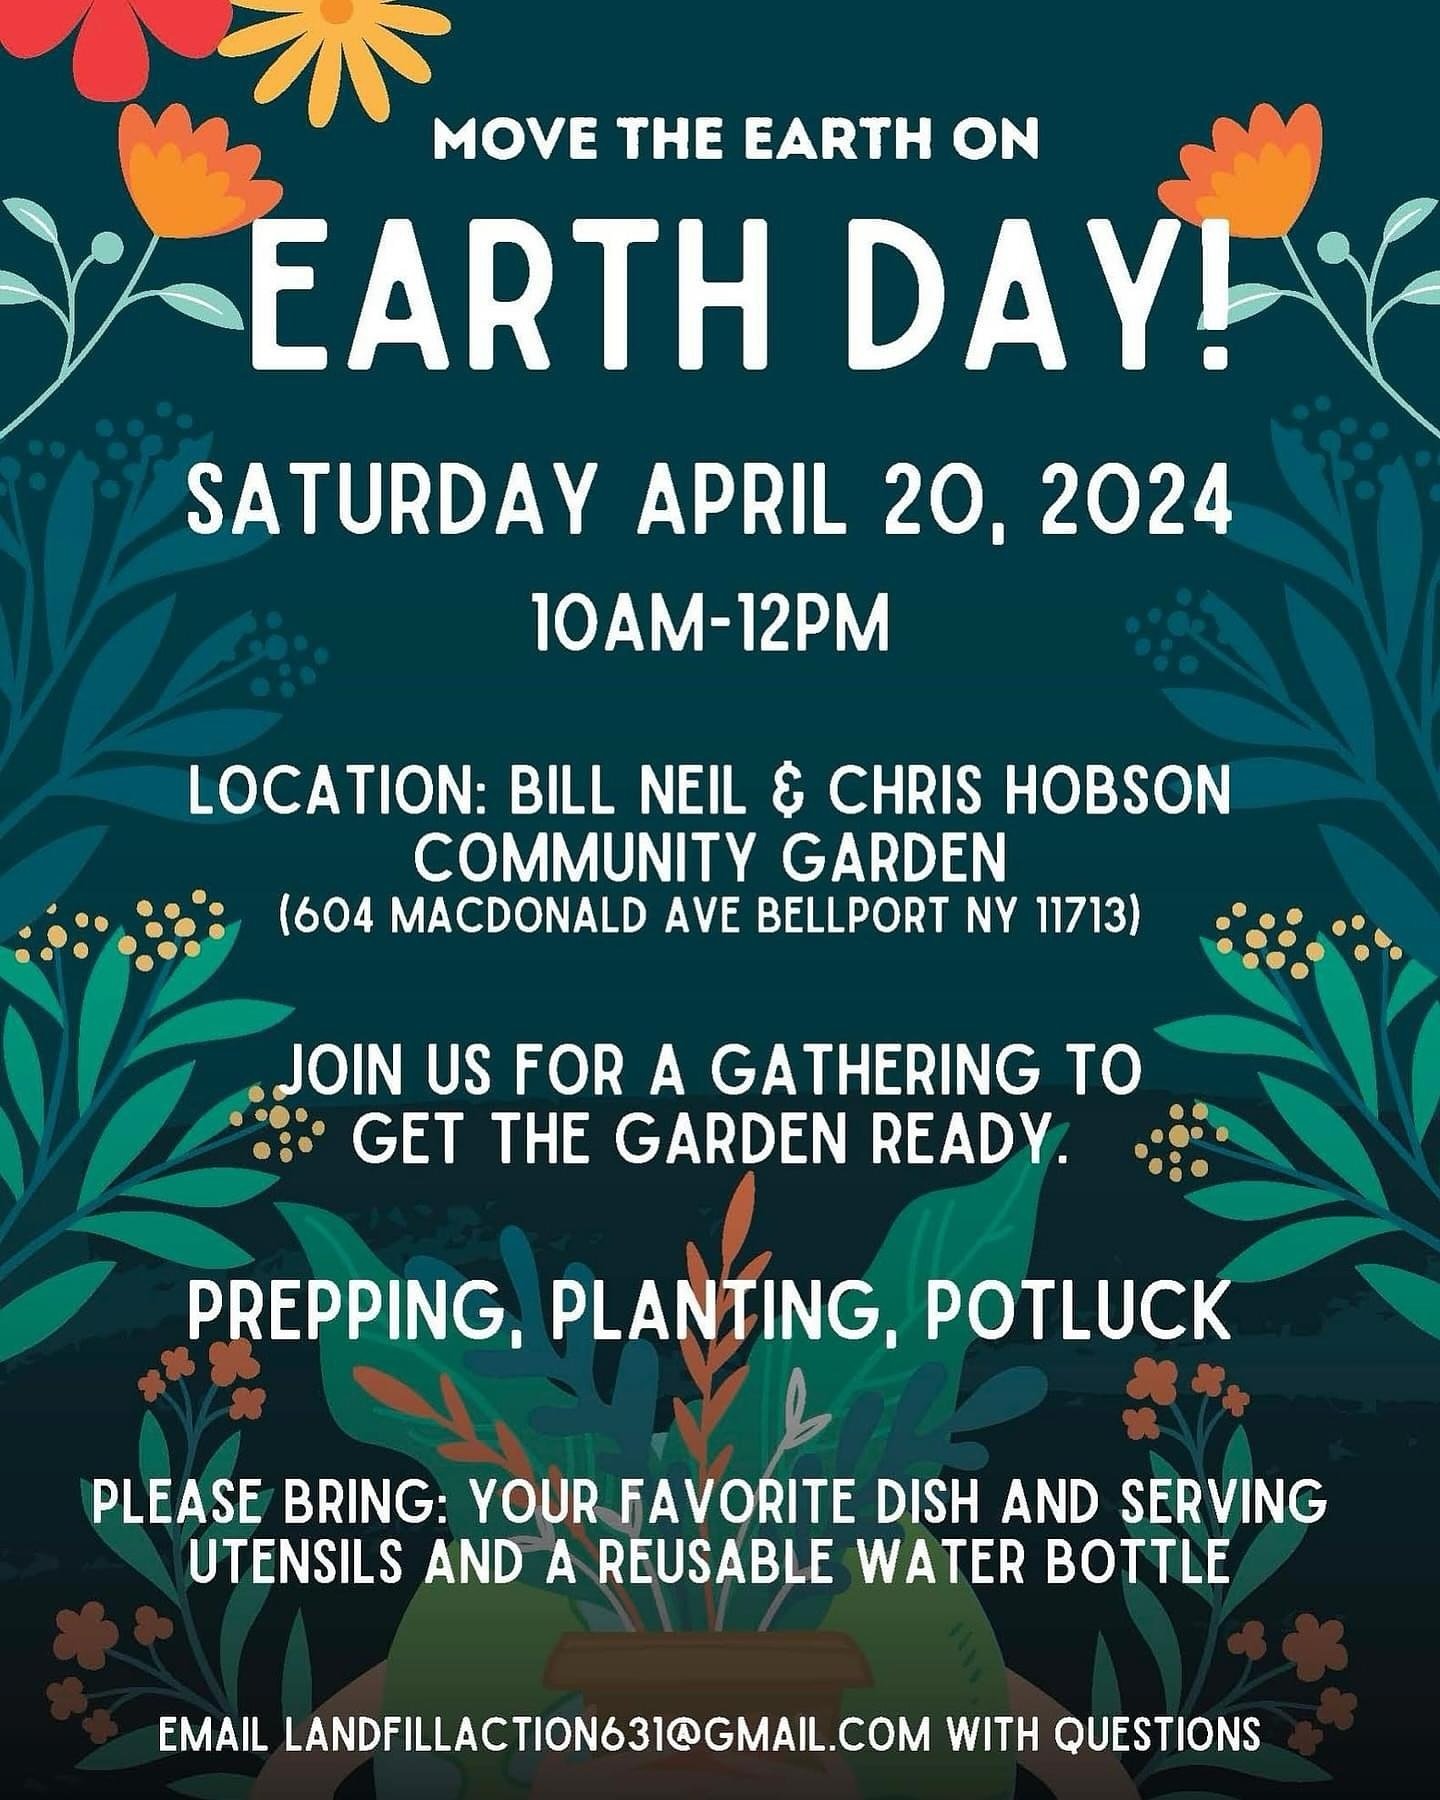 Mark your calendars for April 20th.

See you at the community garden to kick off the season!

#communitygarden #environmentaljustice #composting #earthday